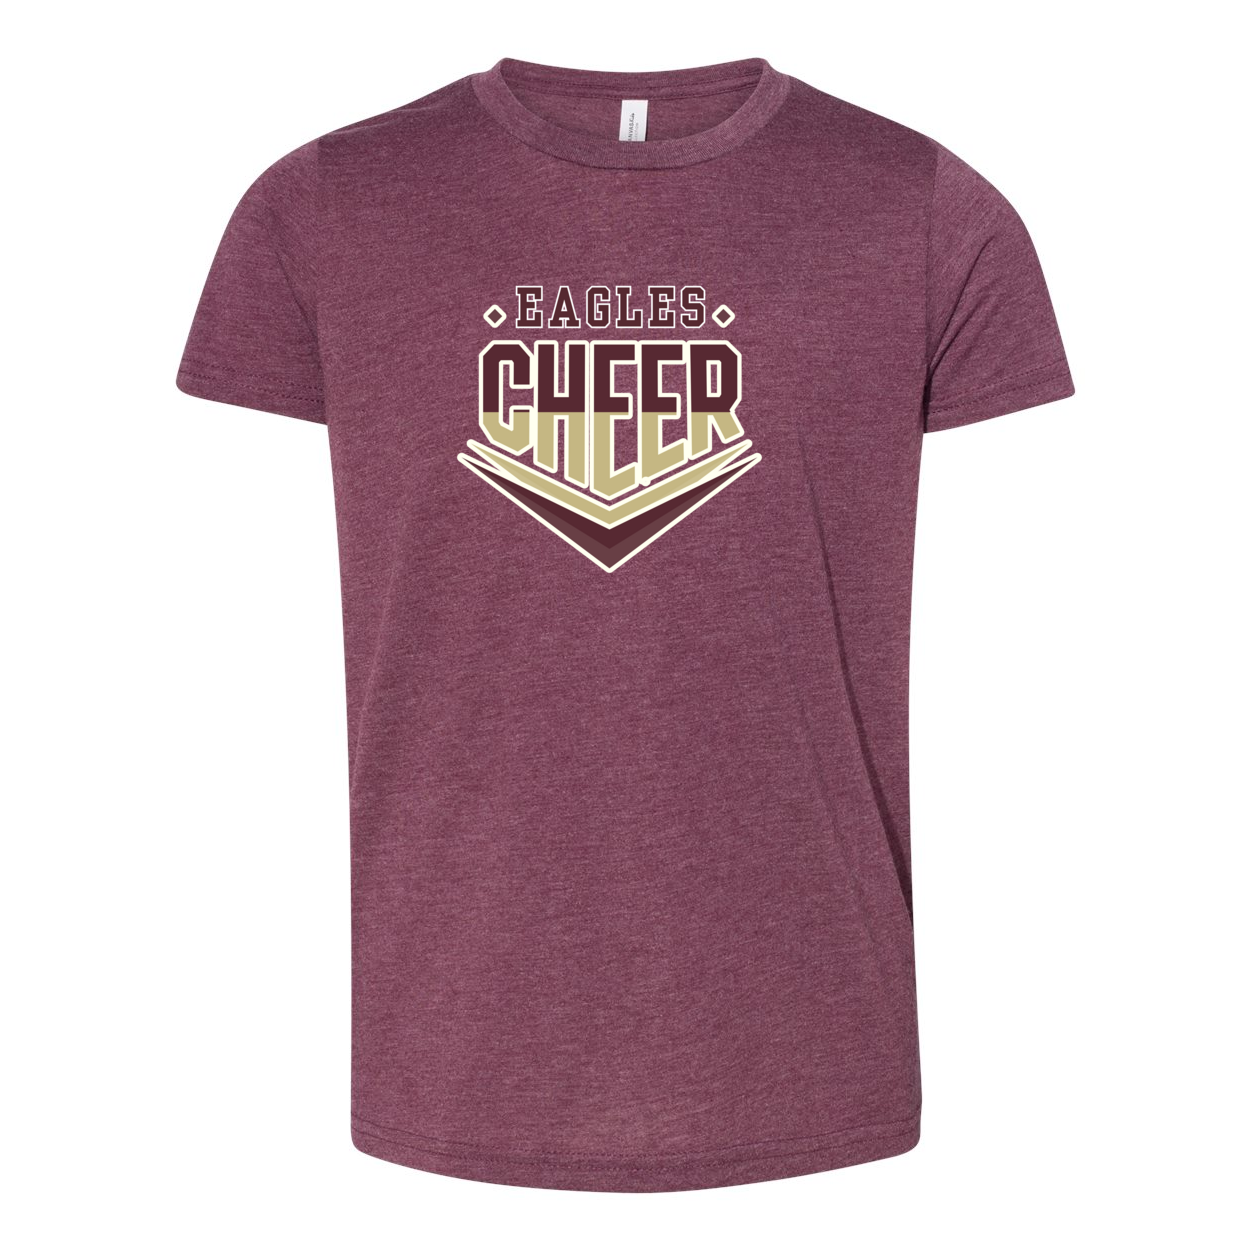 Youth Super Soft Eagles Maroon & Gold Cheer Short Sleeve Graphic Tee - New Albany Eagles